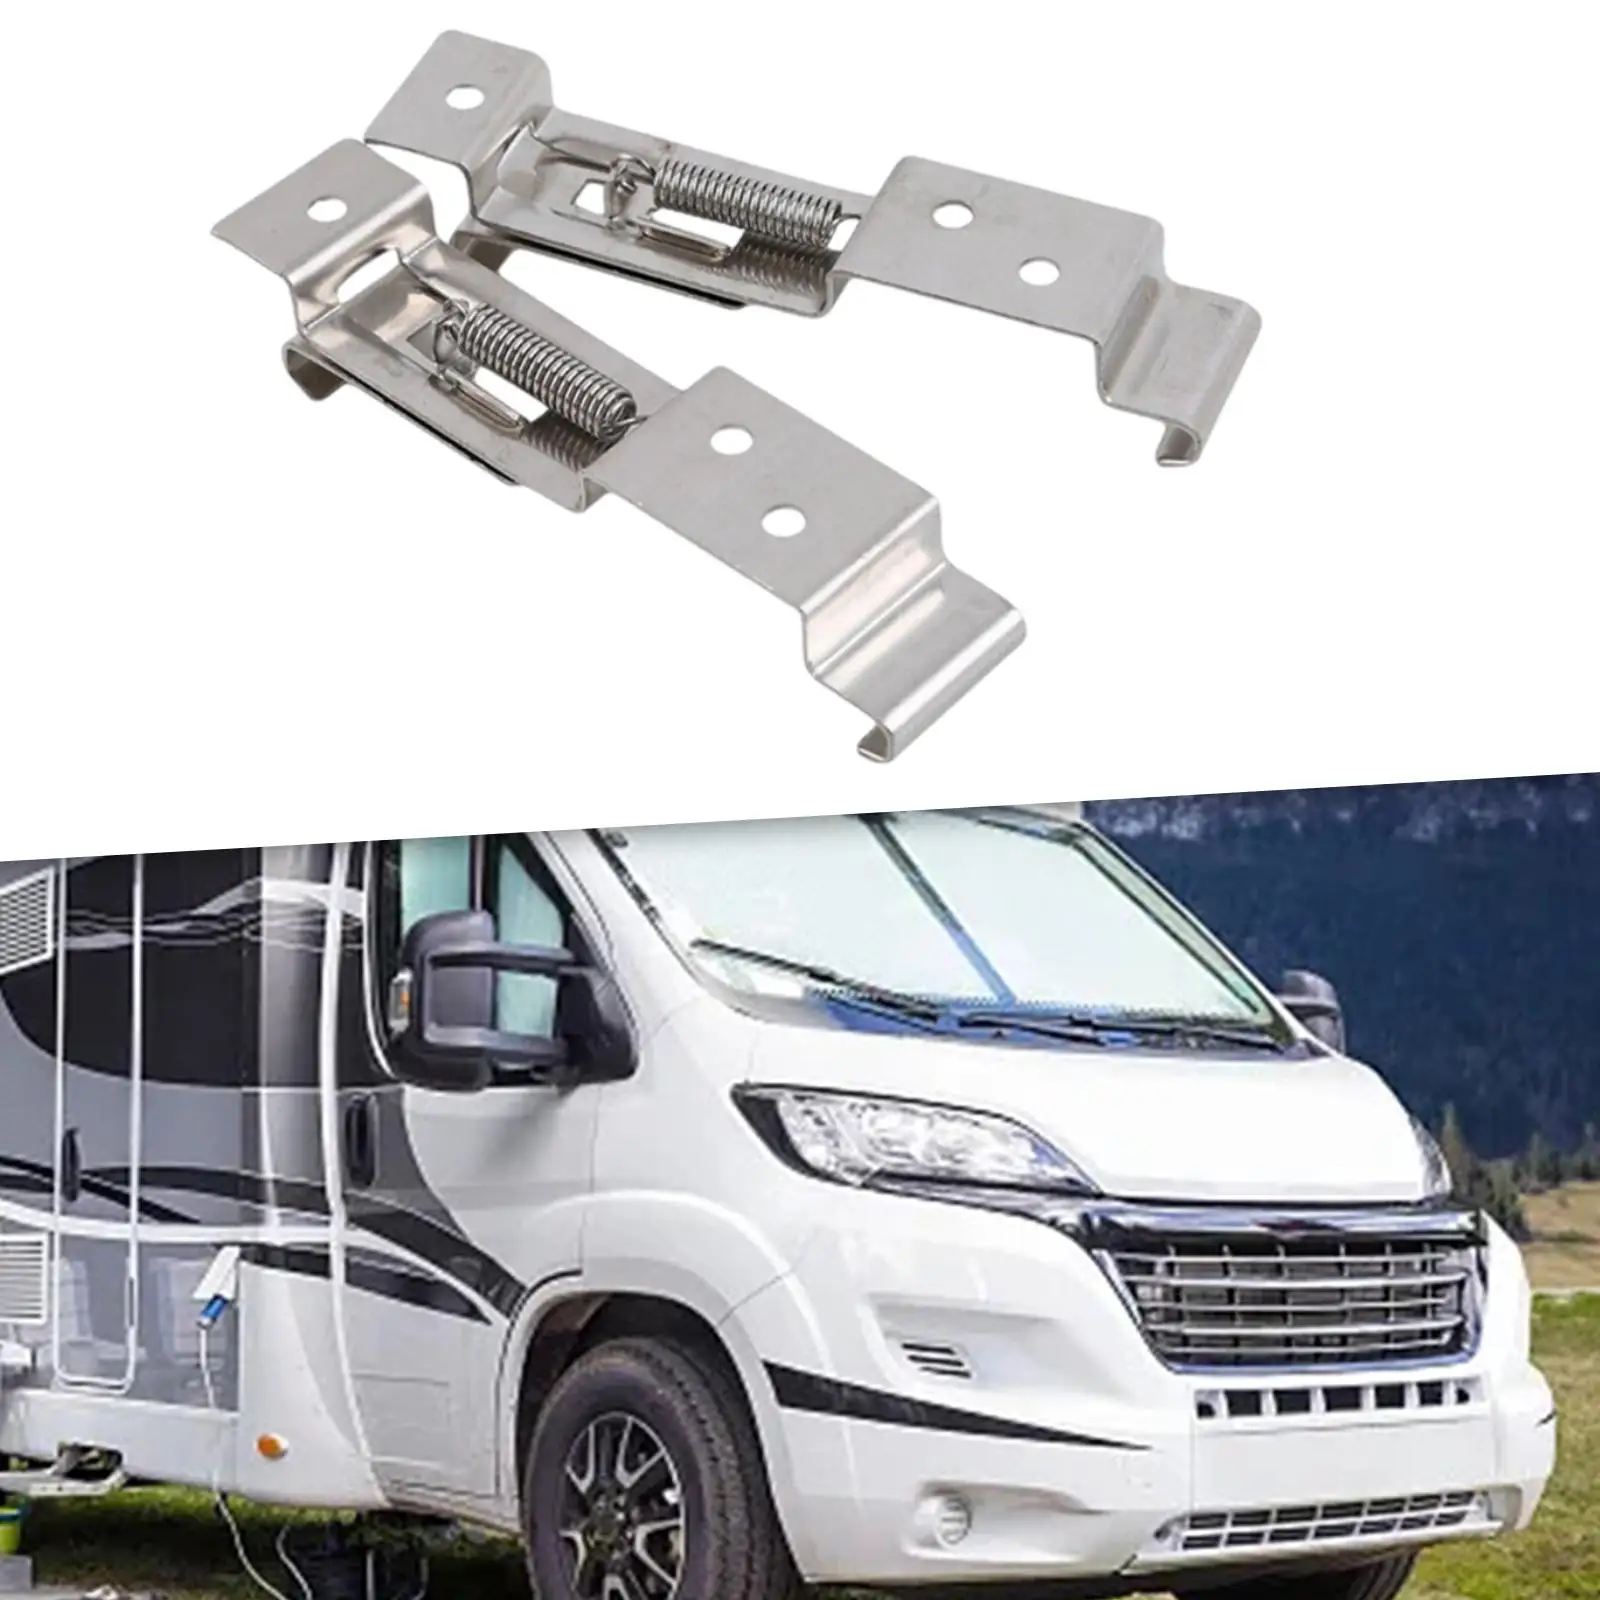 2x Cars License Plate Cover Spring Loaded Bracket License Frame for Truck Trailer High Performance Premium Auto Accessories